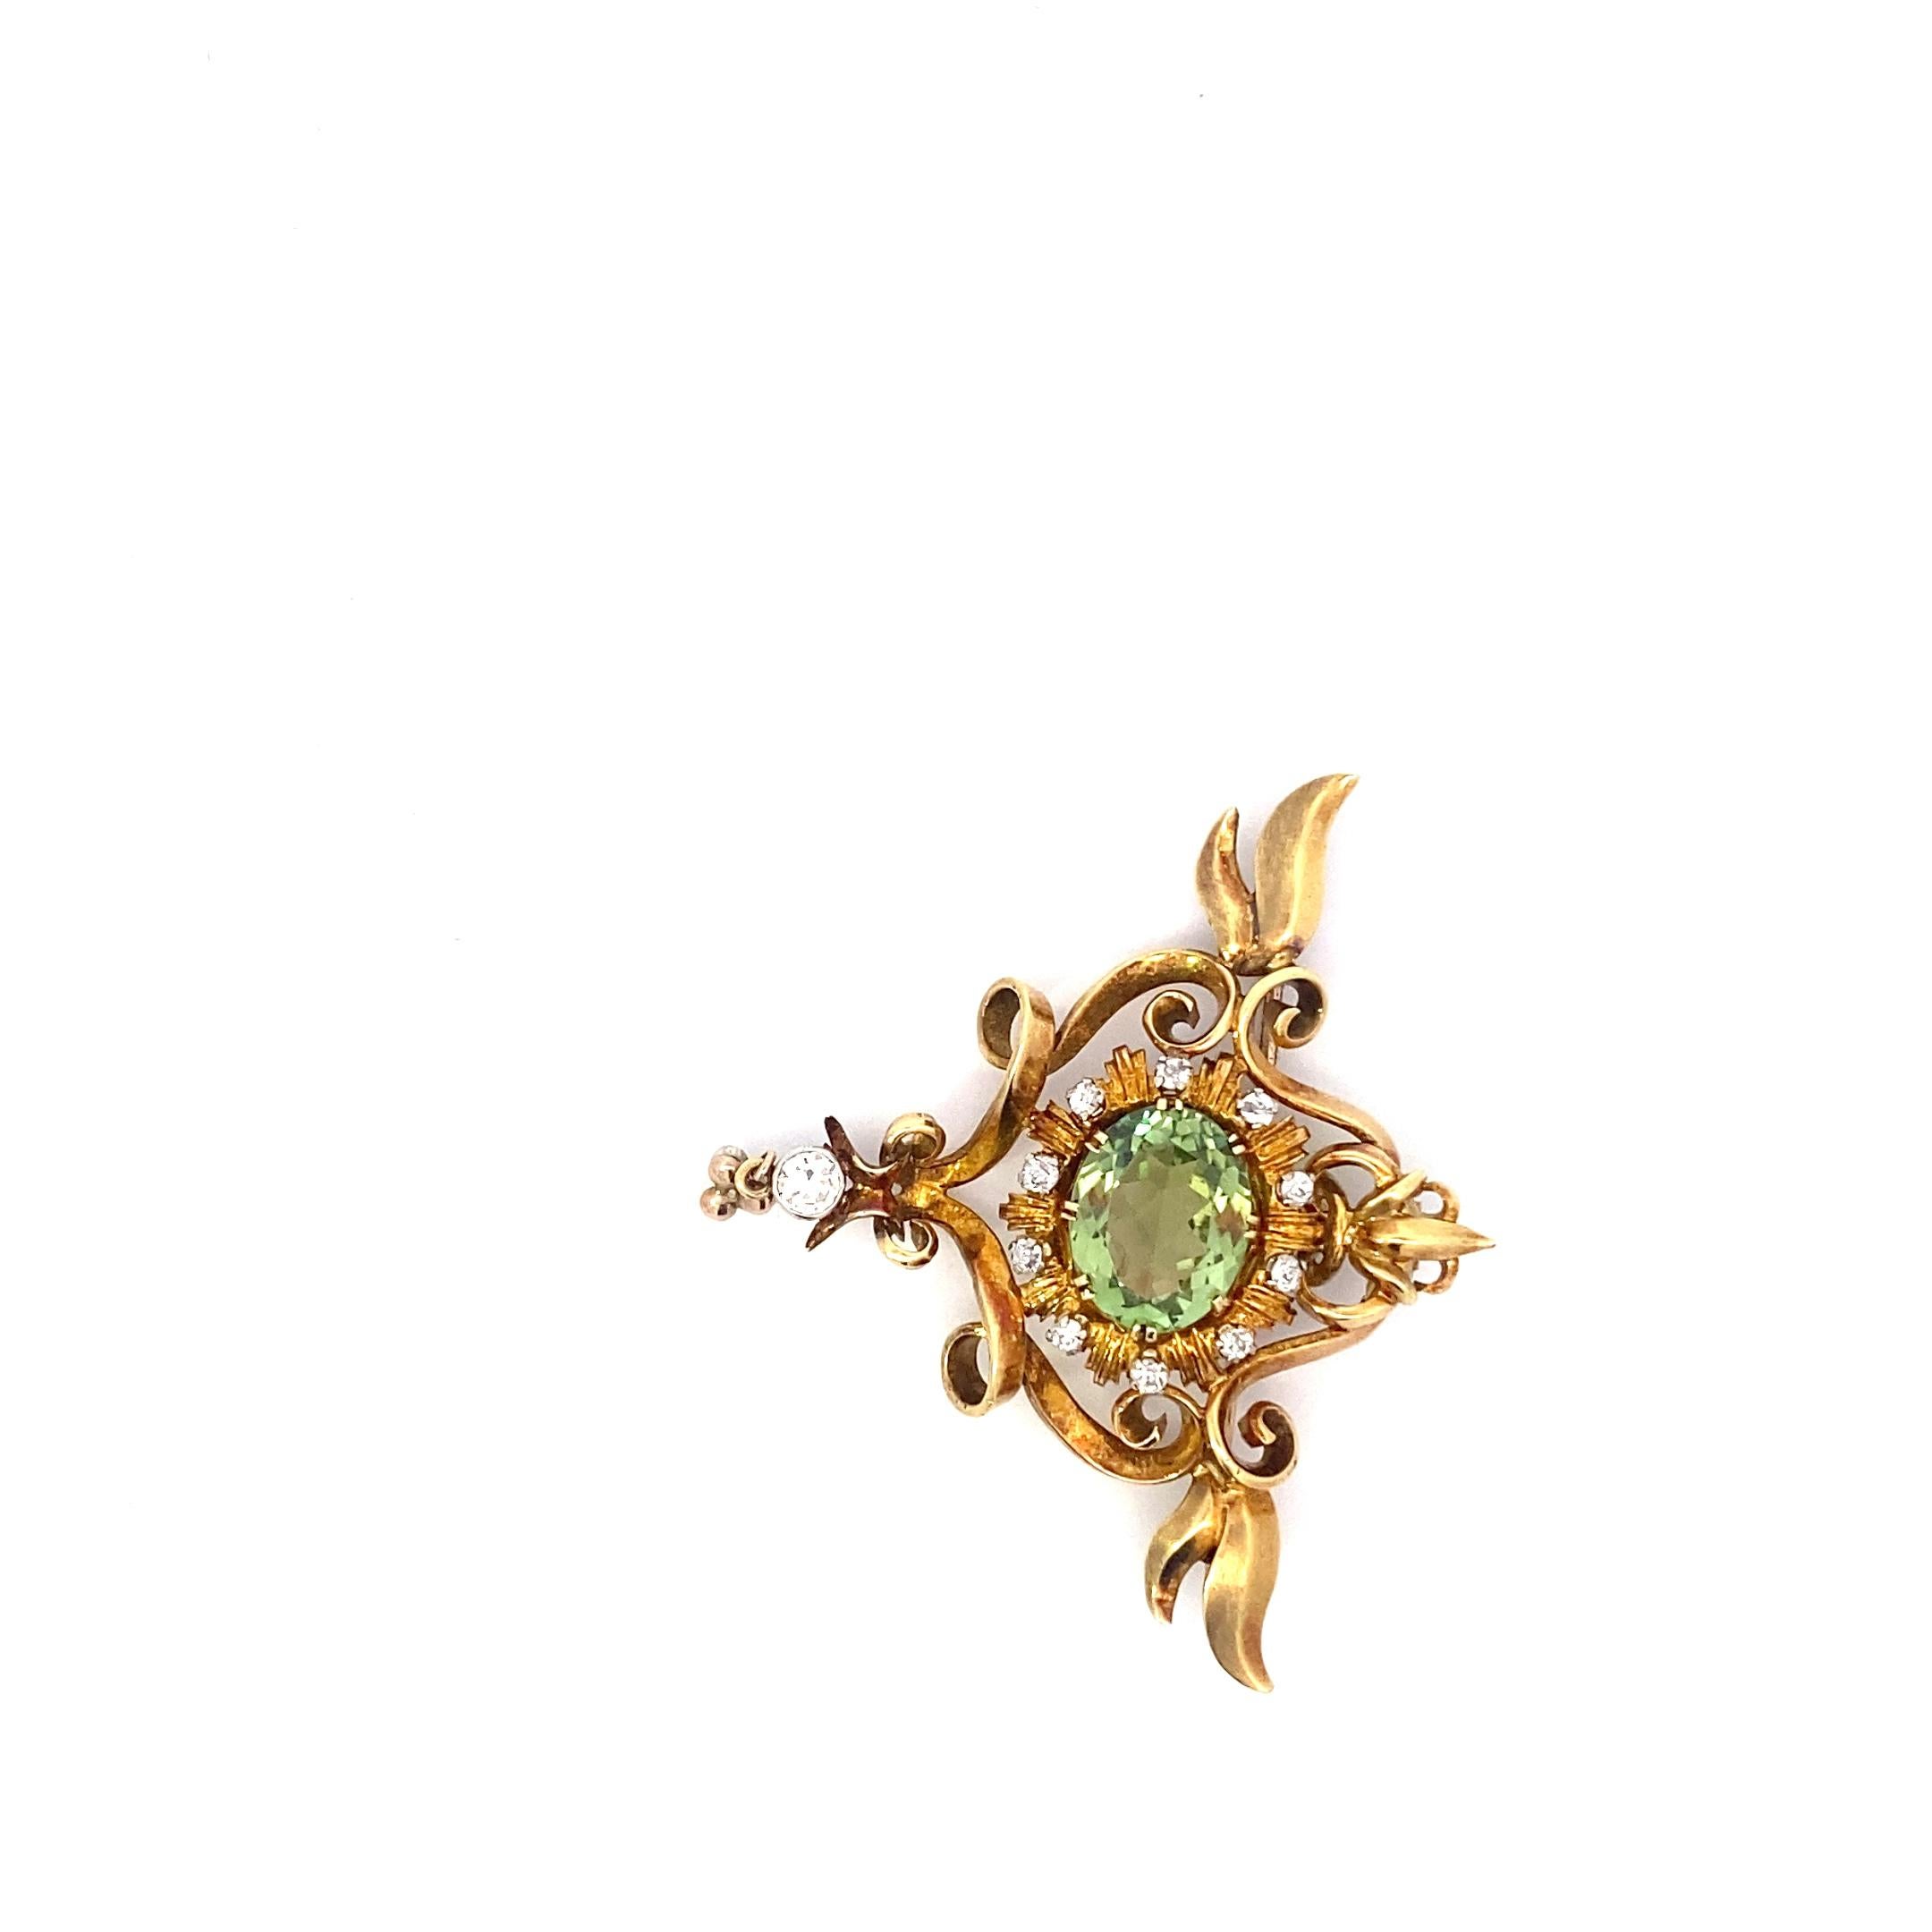 Antique Art Nouveau Brooch, Peridot, Diamonds, Seed Pearls  In Good Condition For Sale In Brooklyn, NY